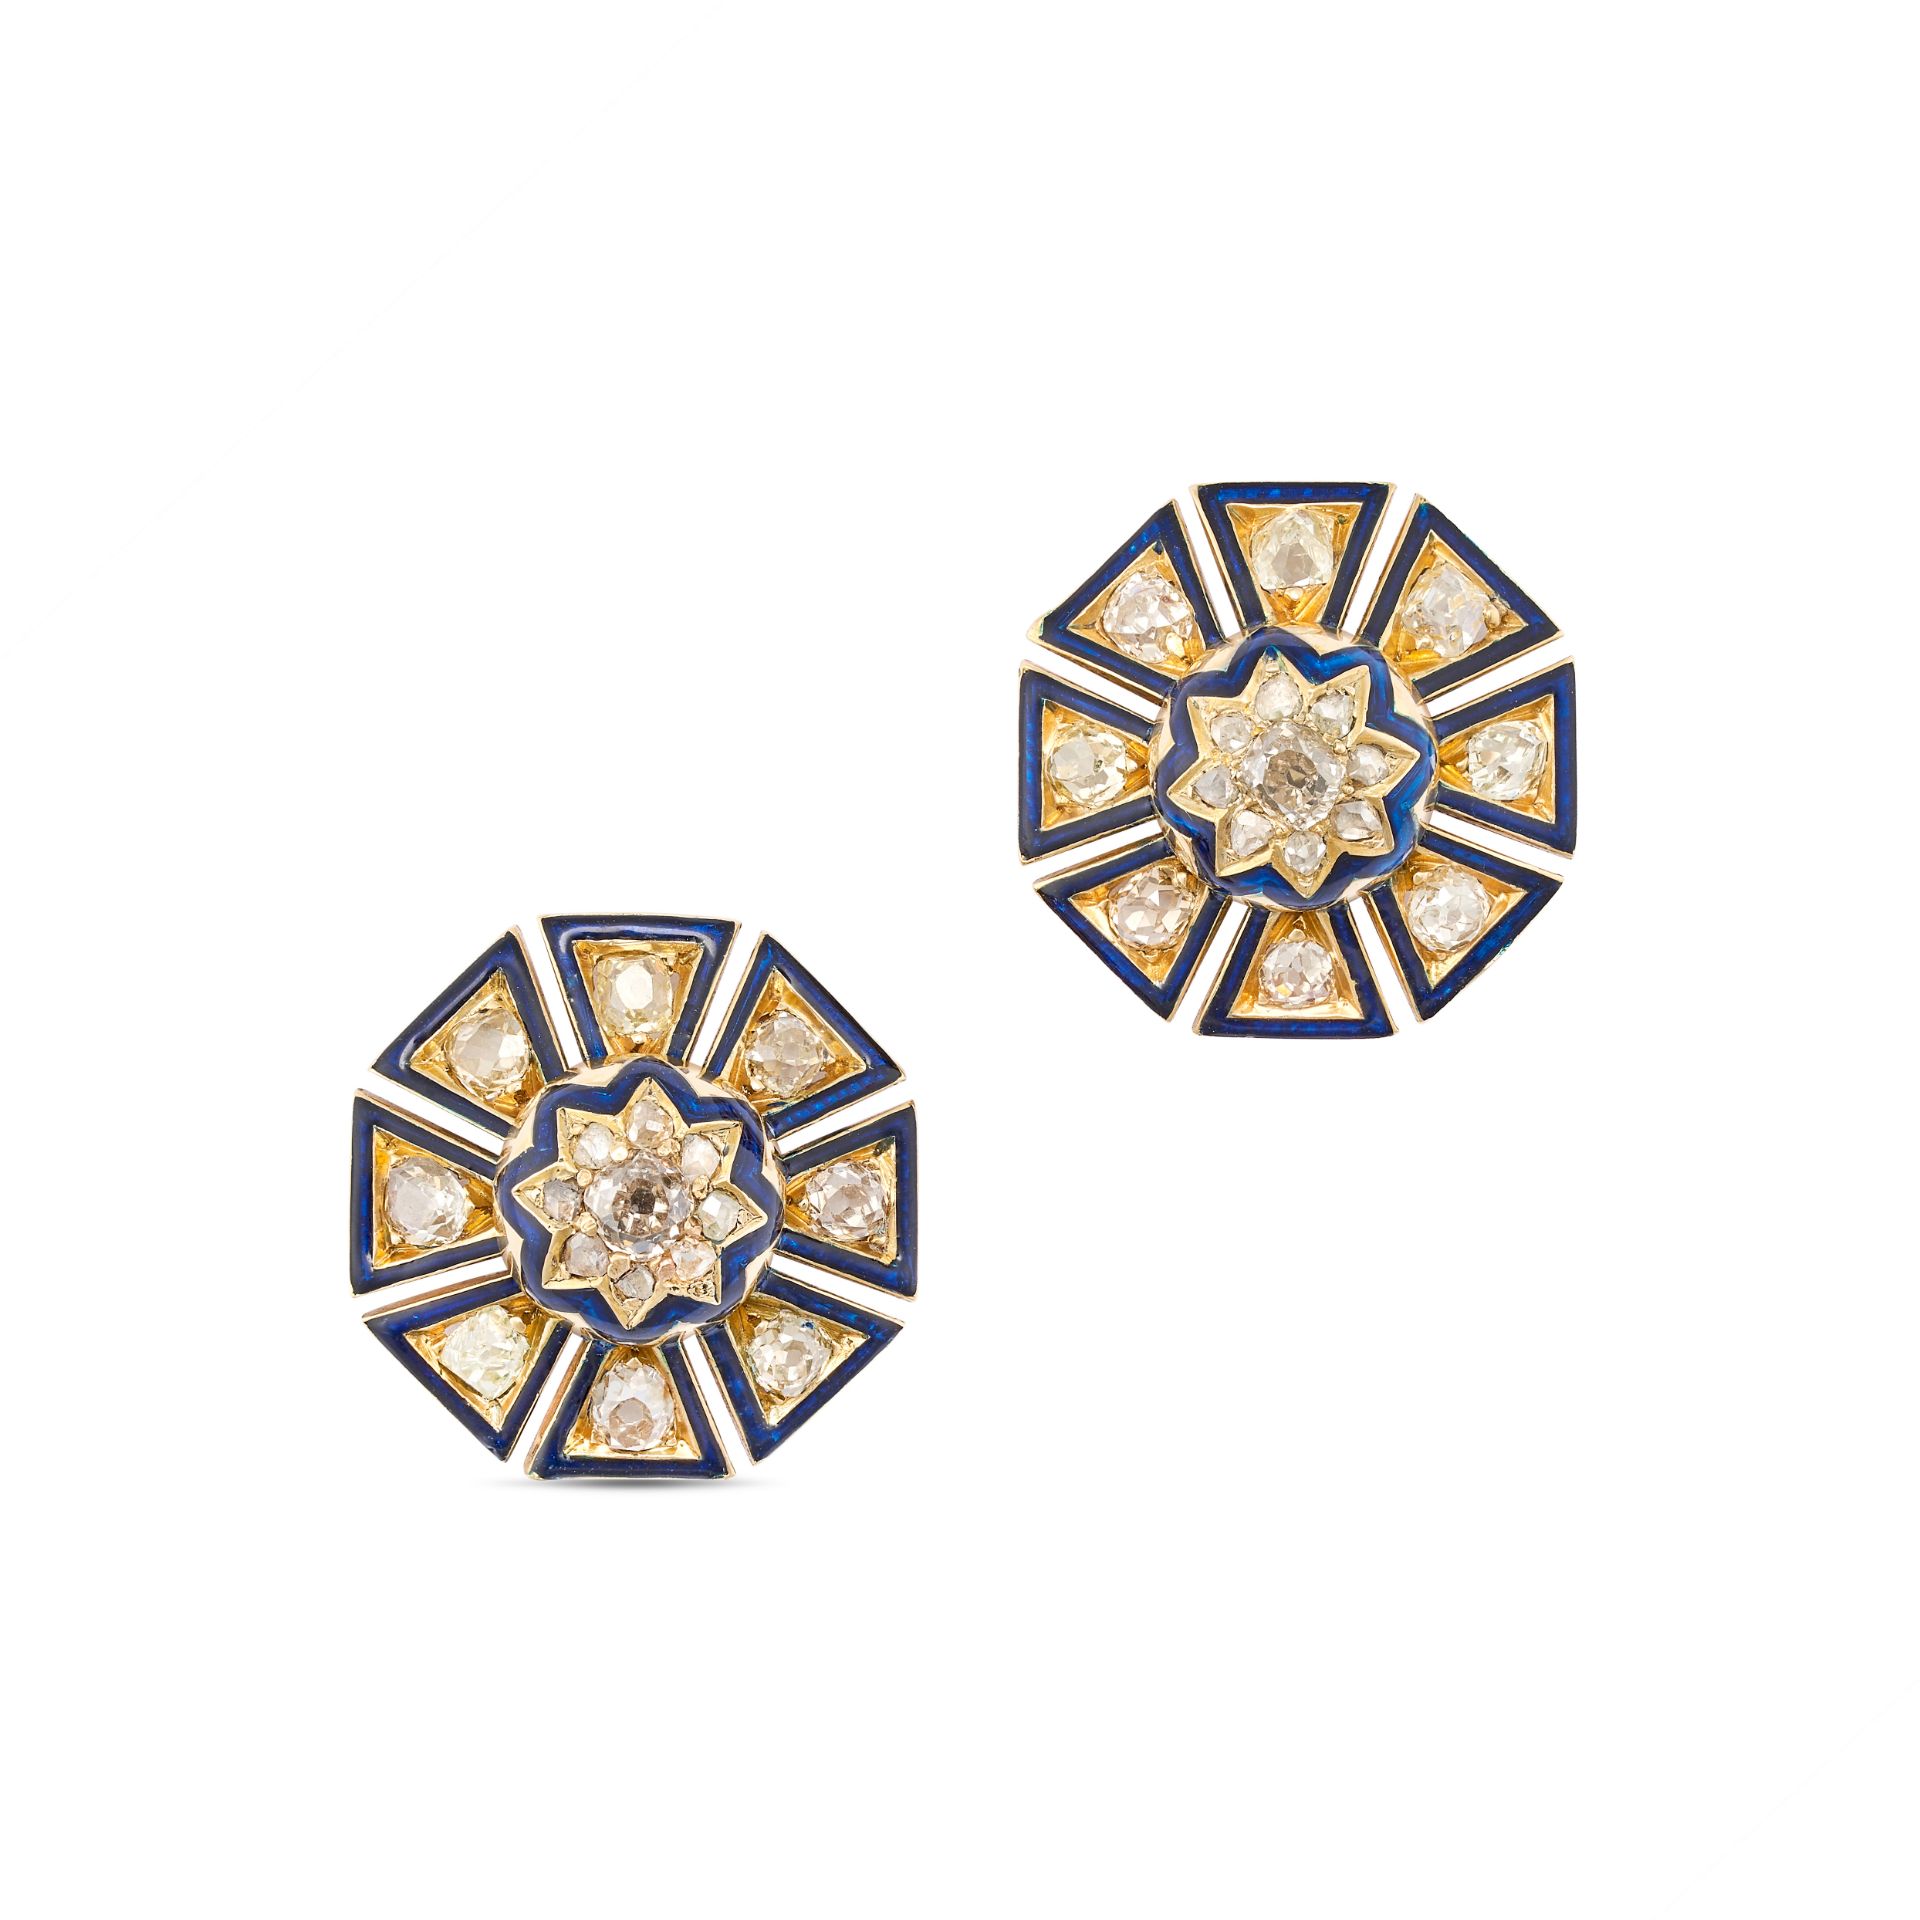 A PAIR OF ANTIQUE DIAMOND AND ENAMEL CLUSTER EARRINGS in yellow gold, set with a cluster of old a...